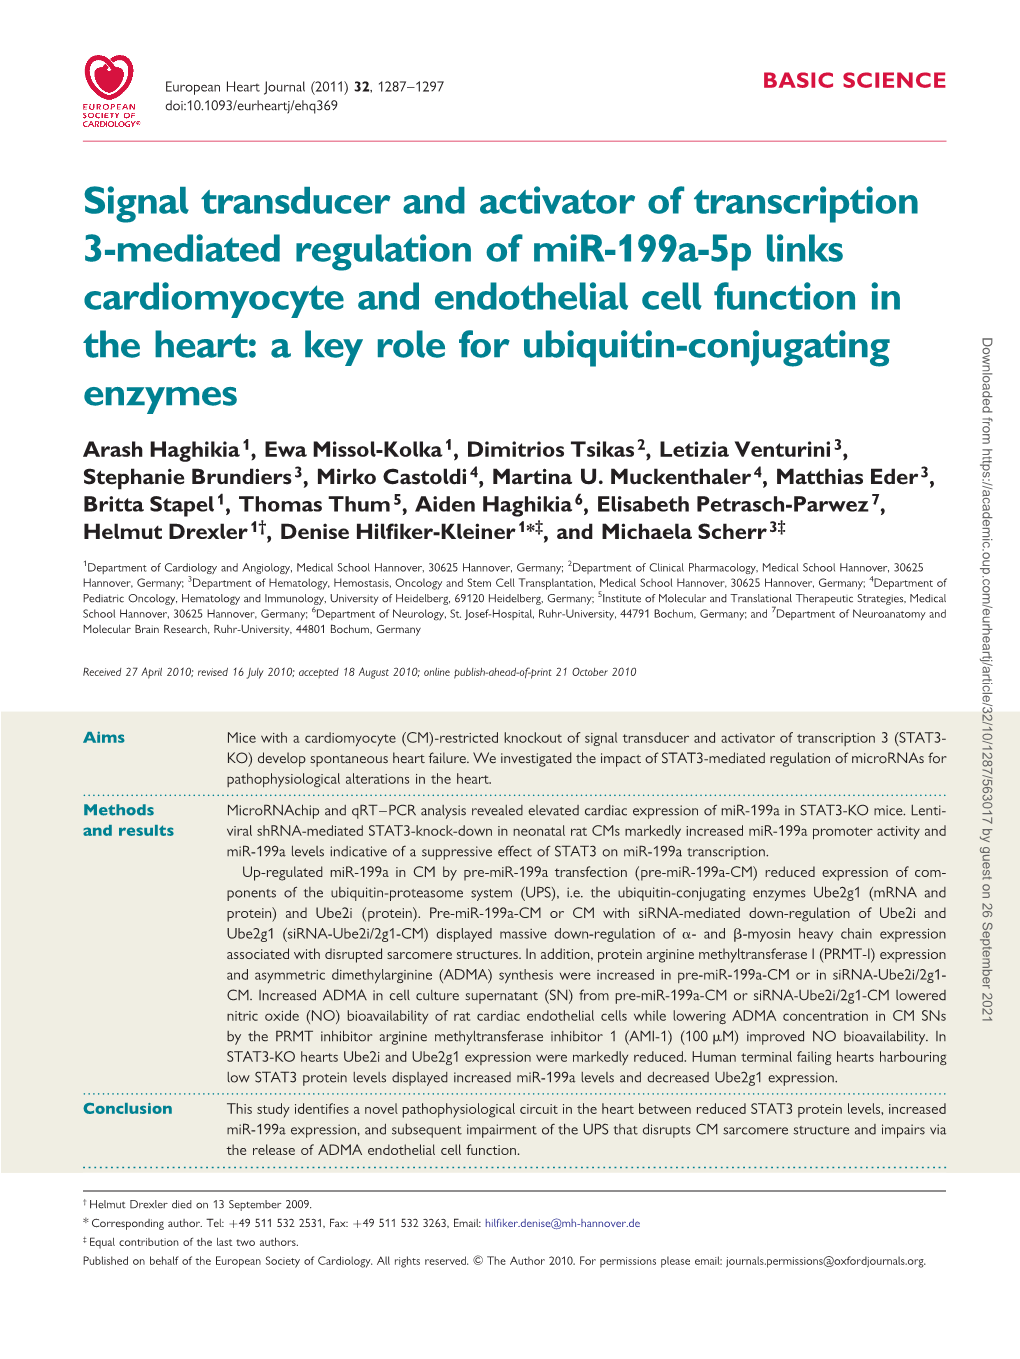 Signal Transducer and Activator of Transcription 3-Mediated Regulation